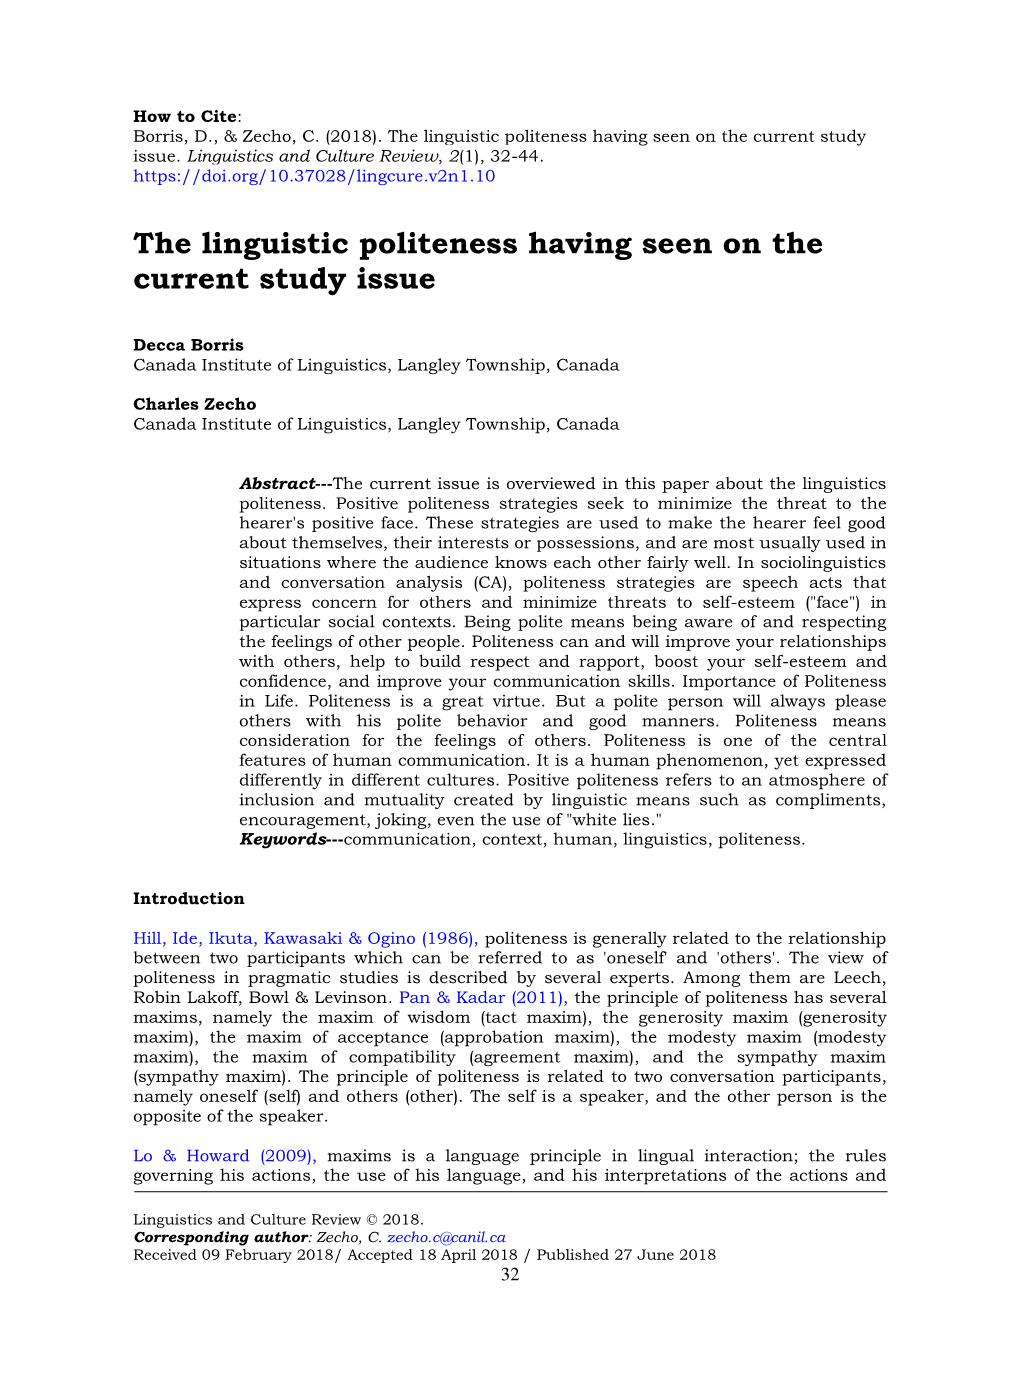 The Linguistic Politeness Having Seen on the Current Study Issue